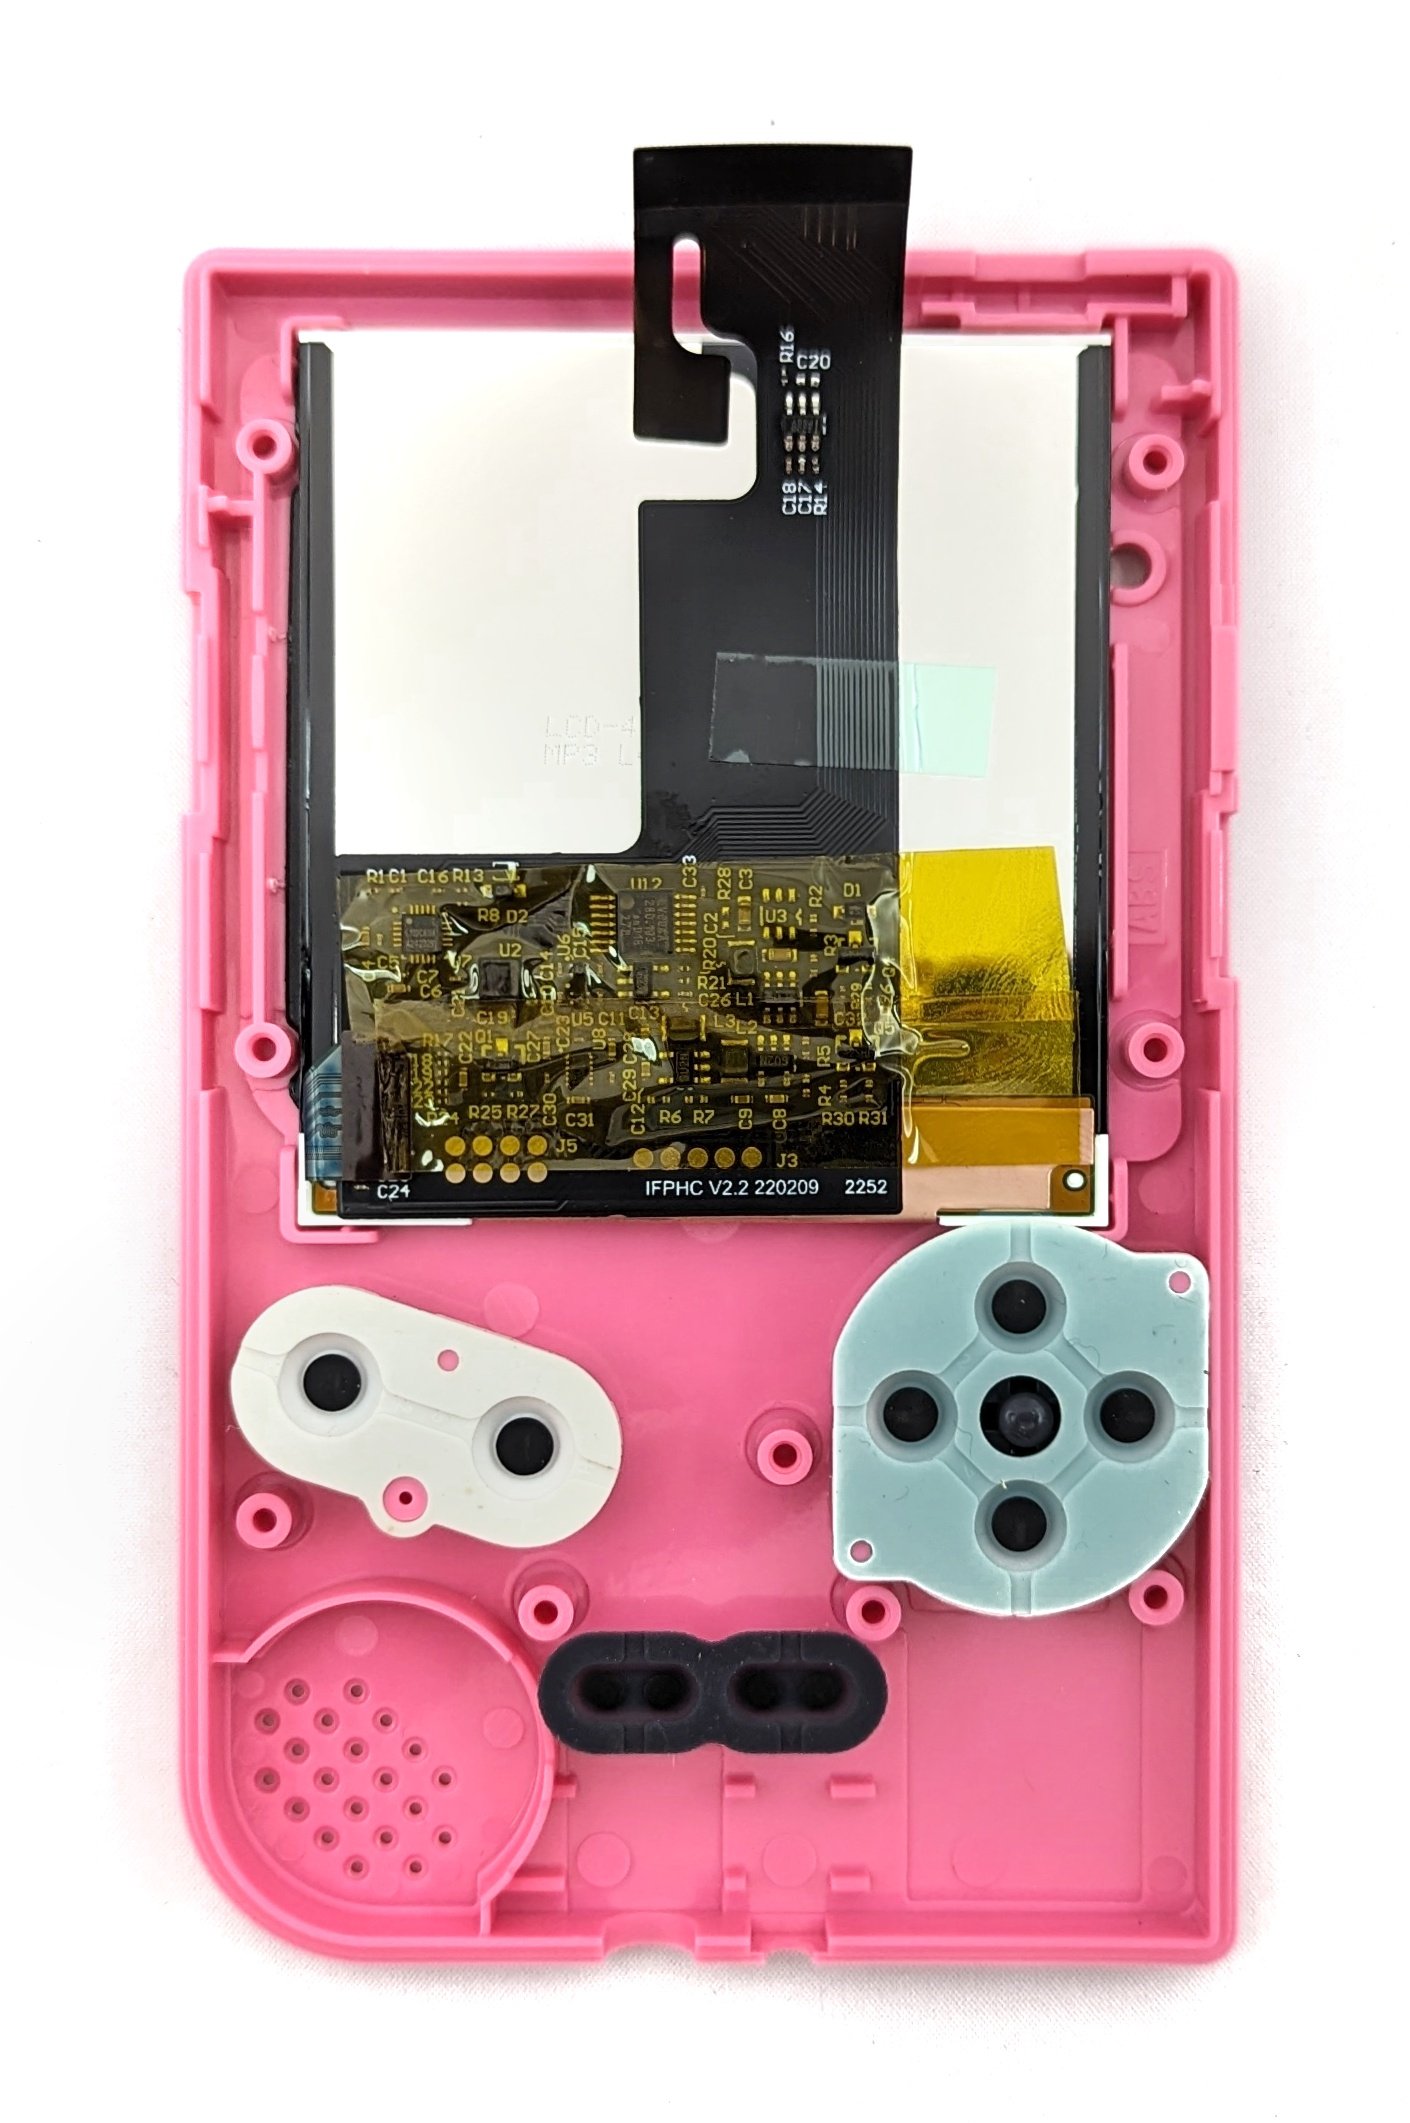 The front shell of a pink GameBoy with buttons and screen inserted.